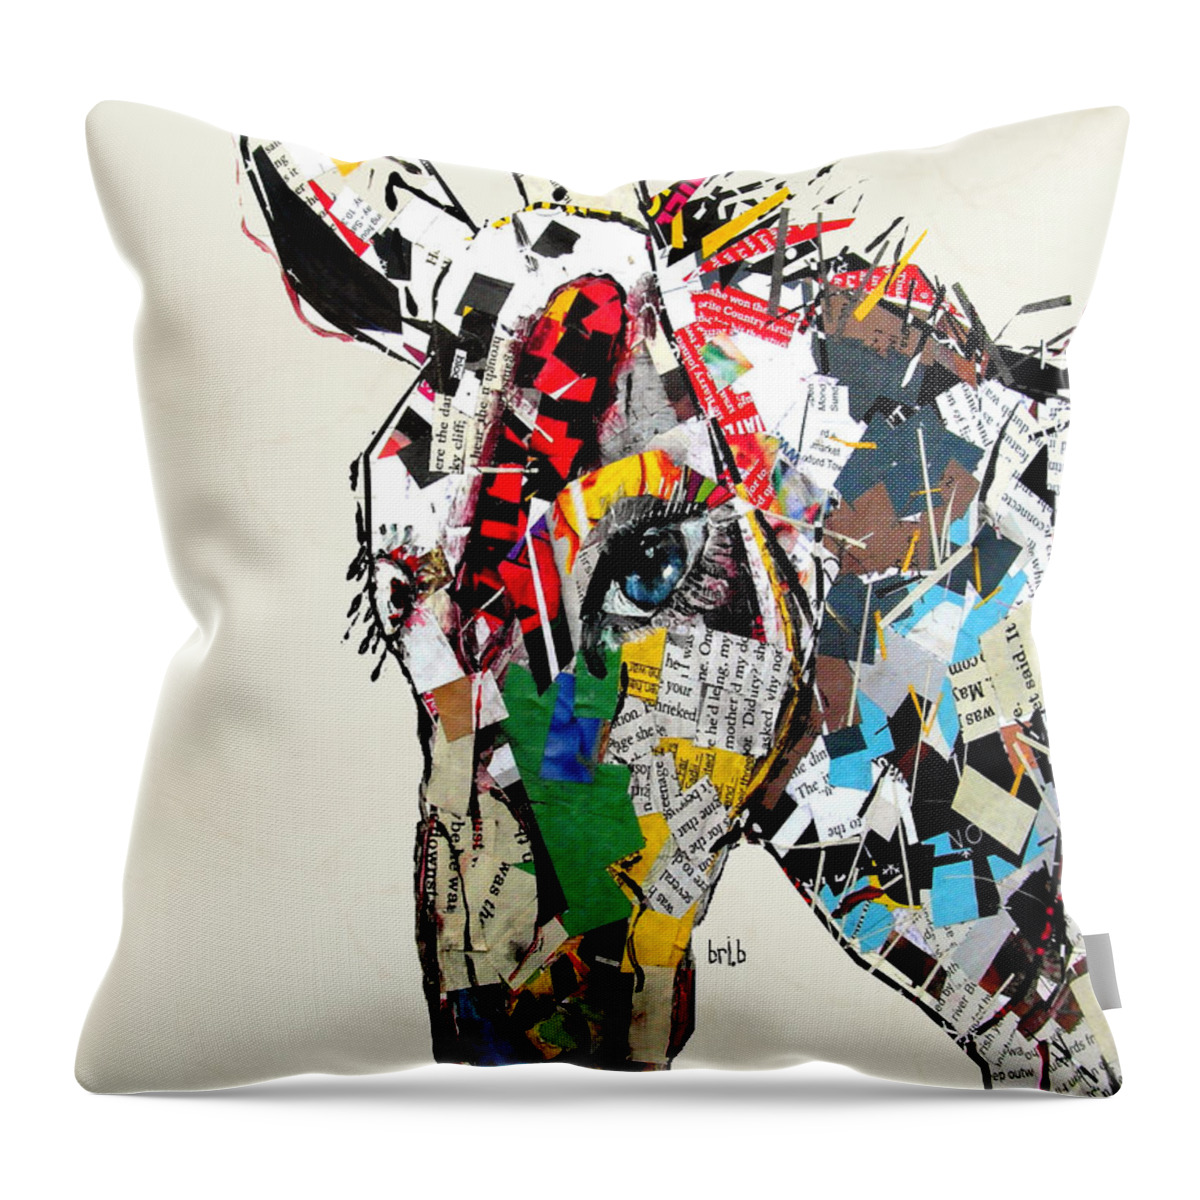 Donkeys Throw Pillow featuring the painting The Mod Donkey by Bri Buckley